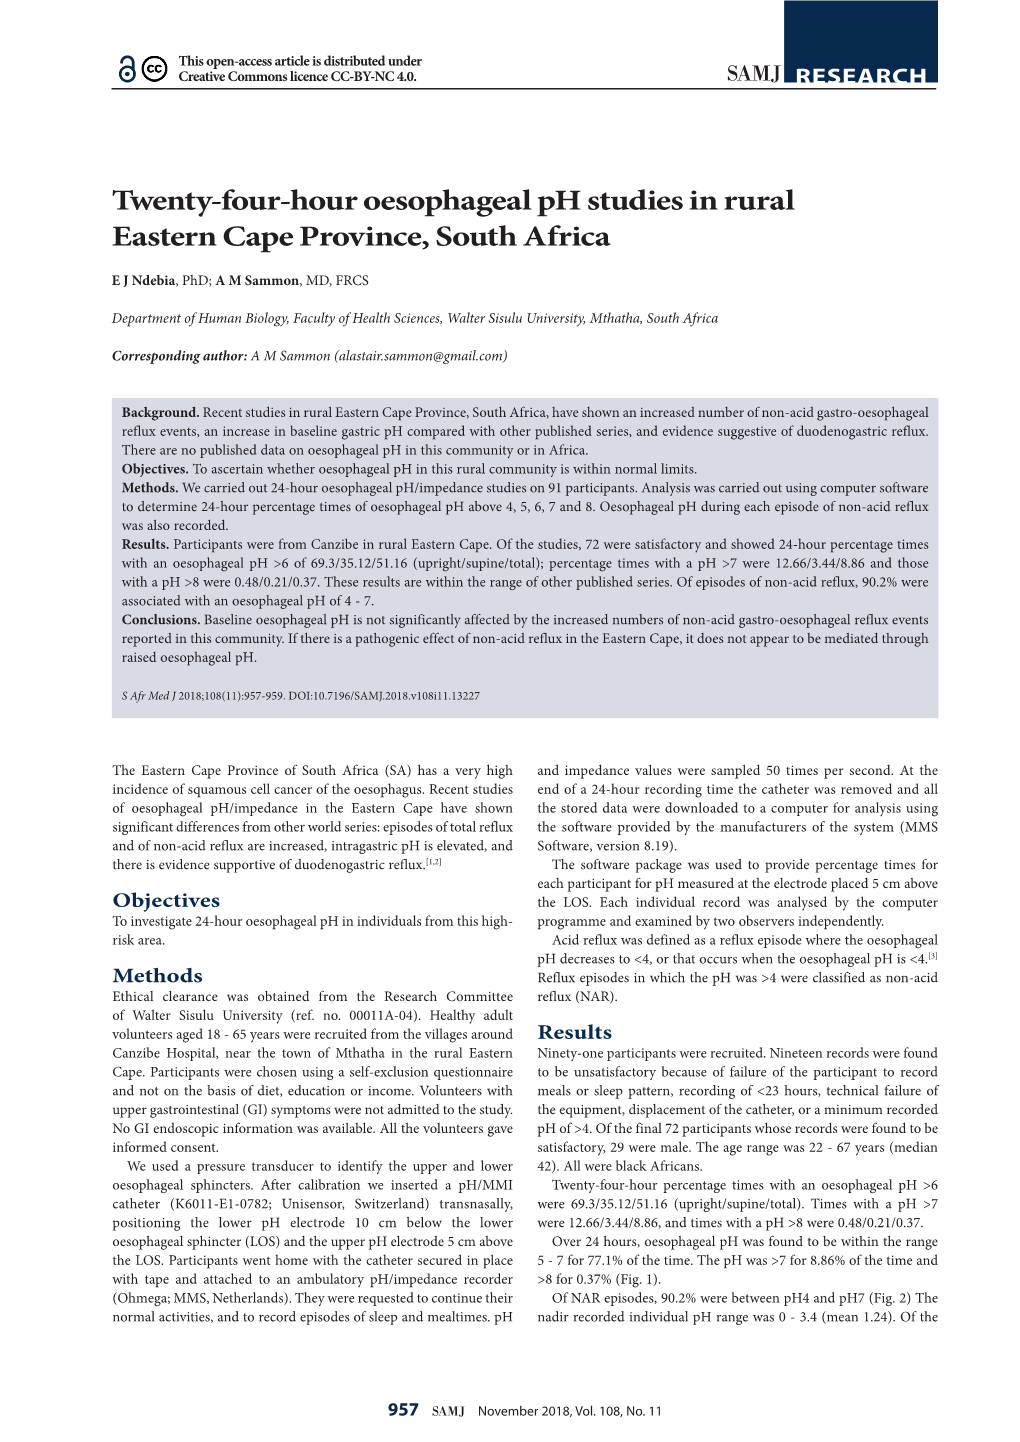 Twenty-Four-Hour Oesophageal Ph Studies in Rural Eastern Cape Province, South Africa